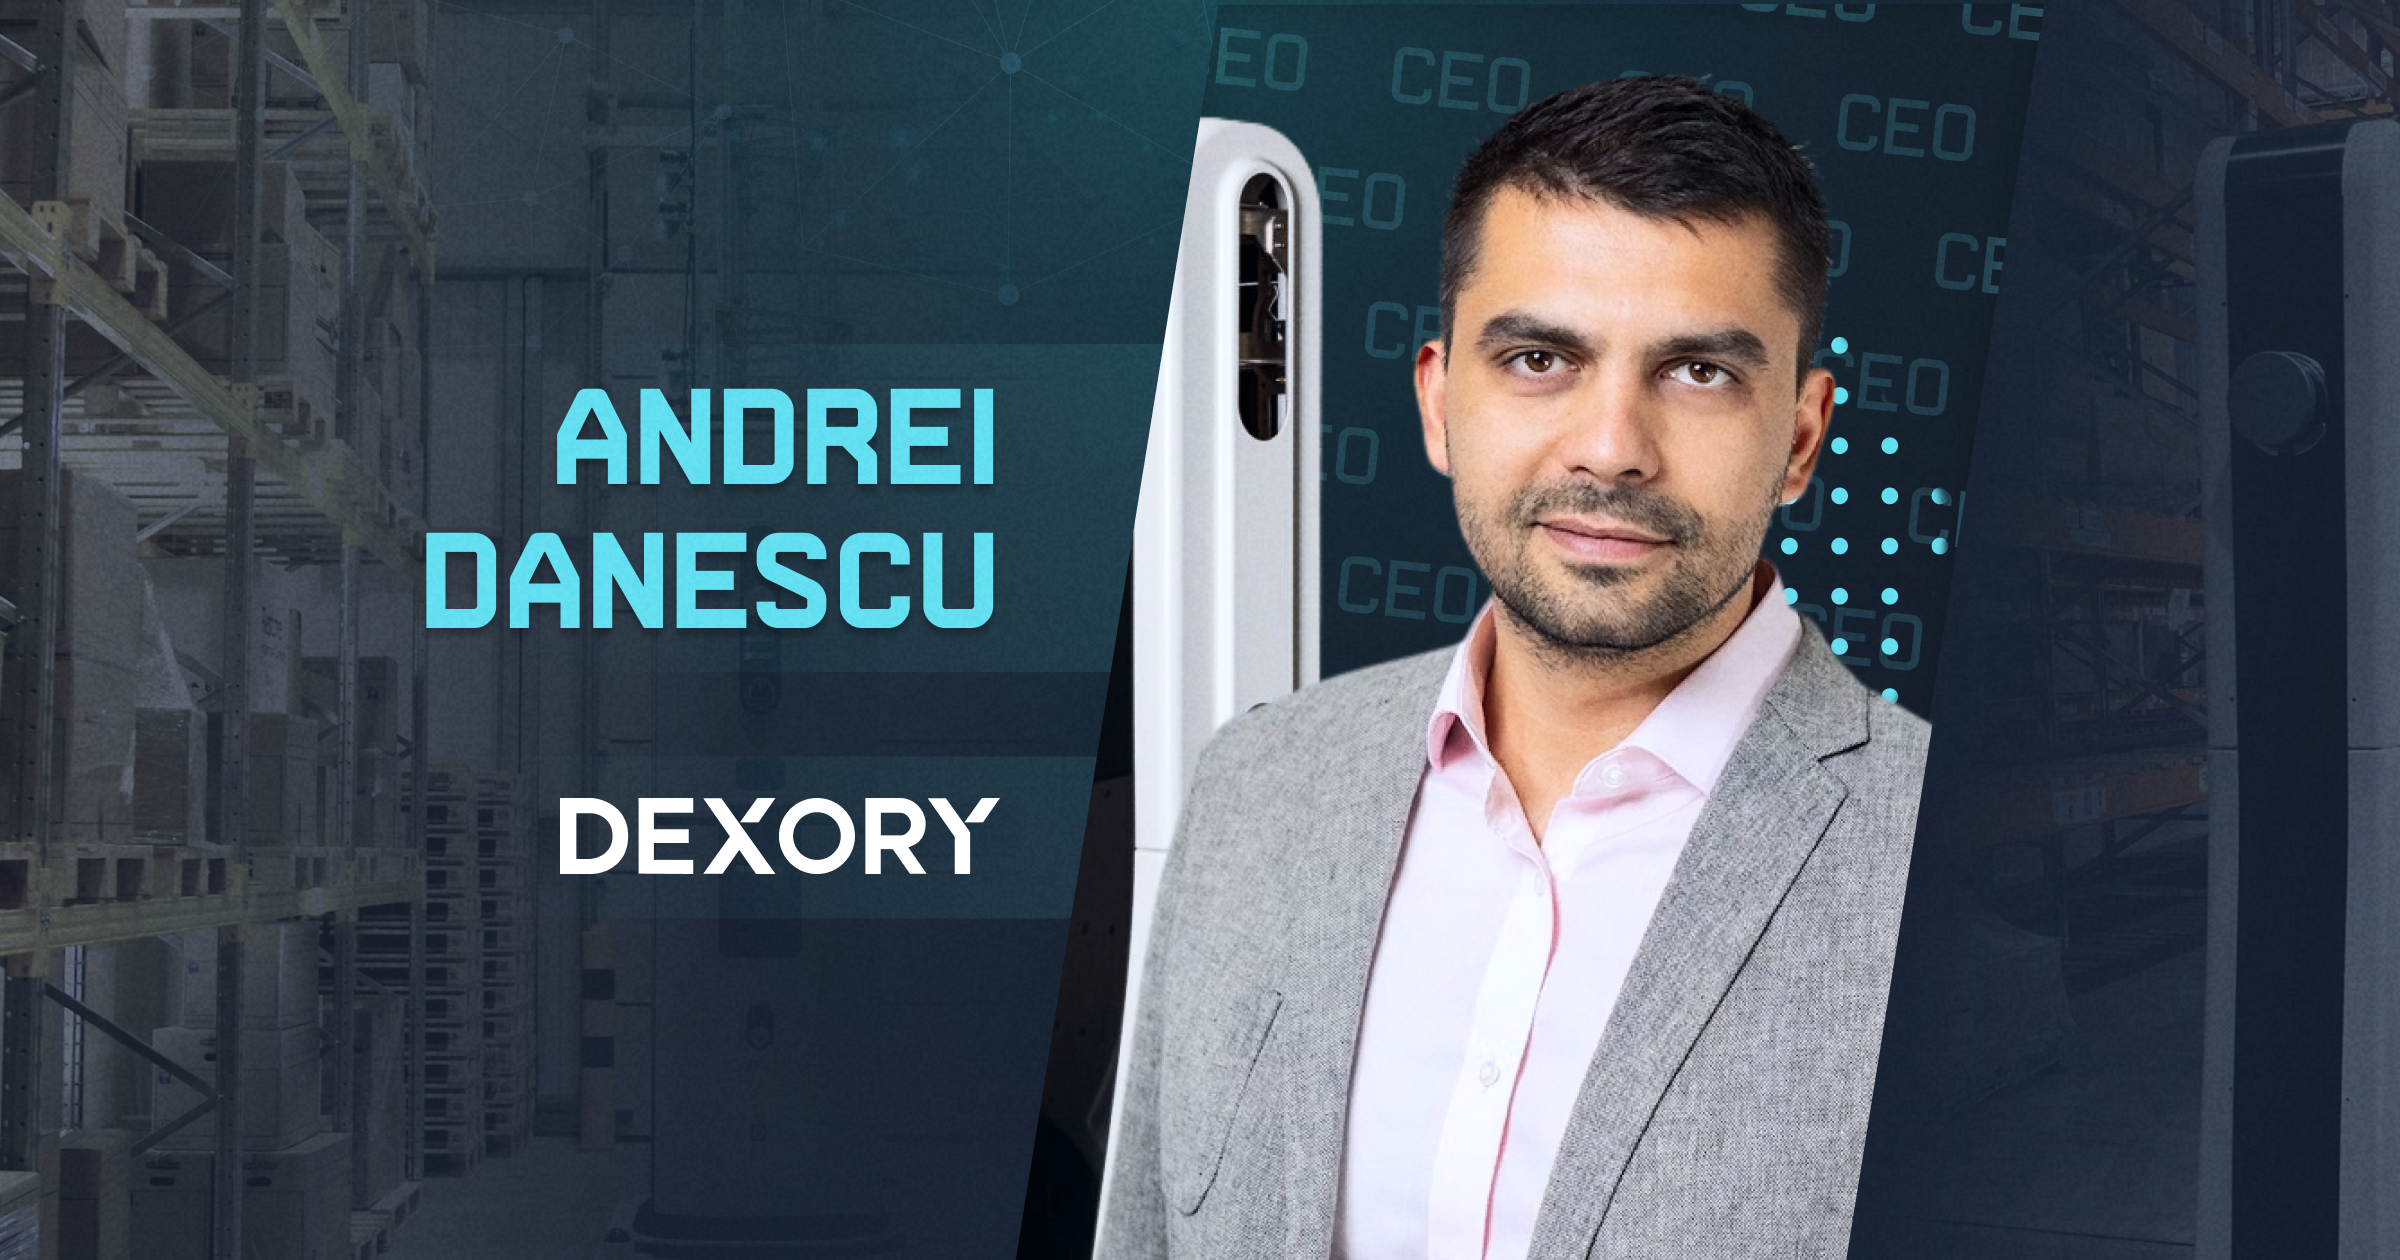 Andrei Danescu: Dexory's Vision for Tomorrow's Supply Chains